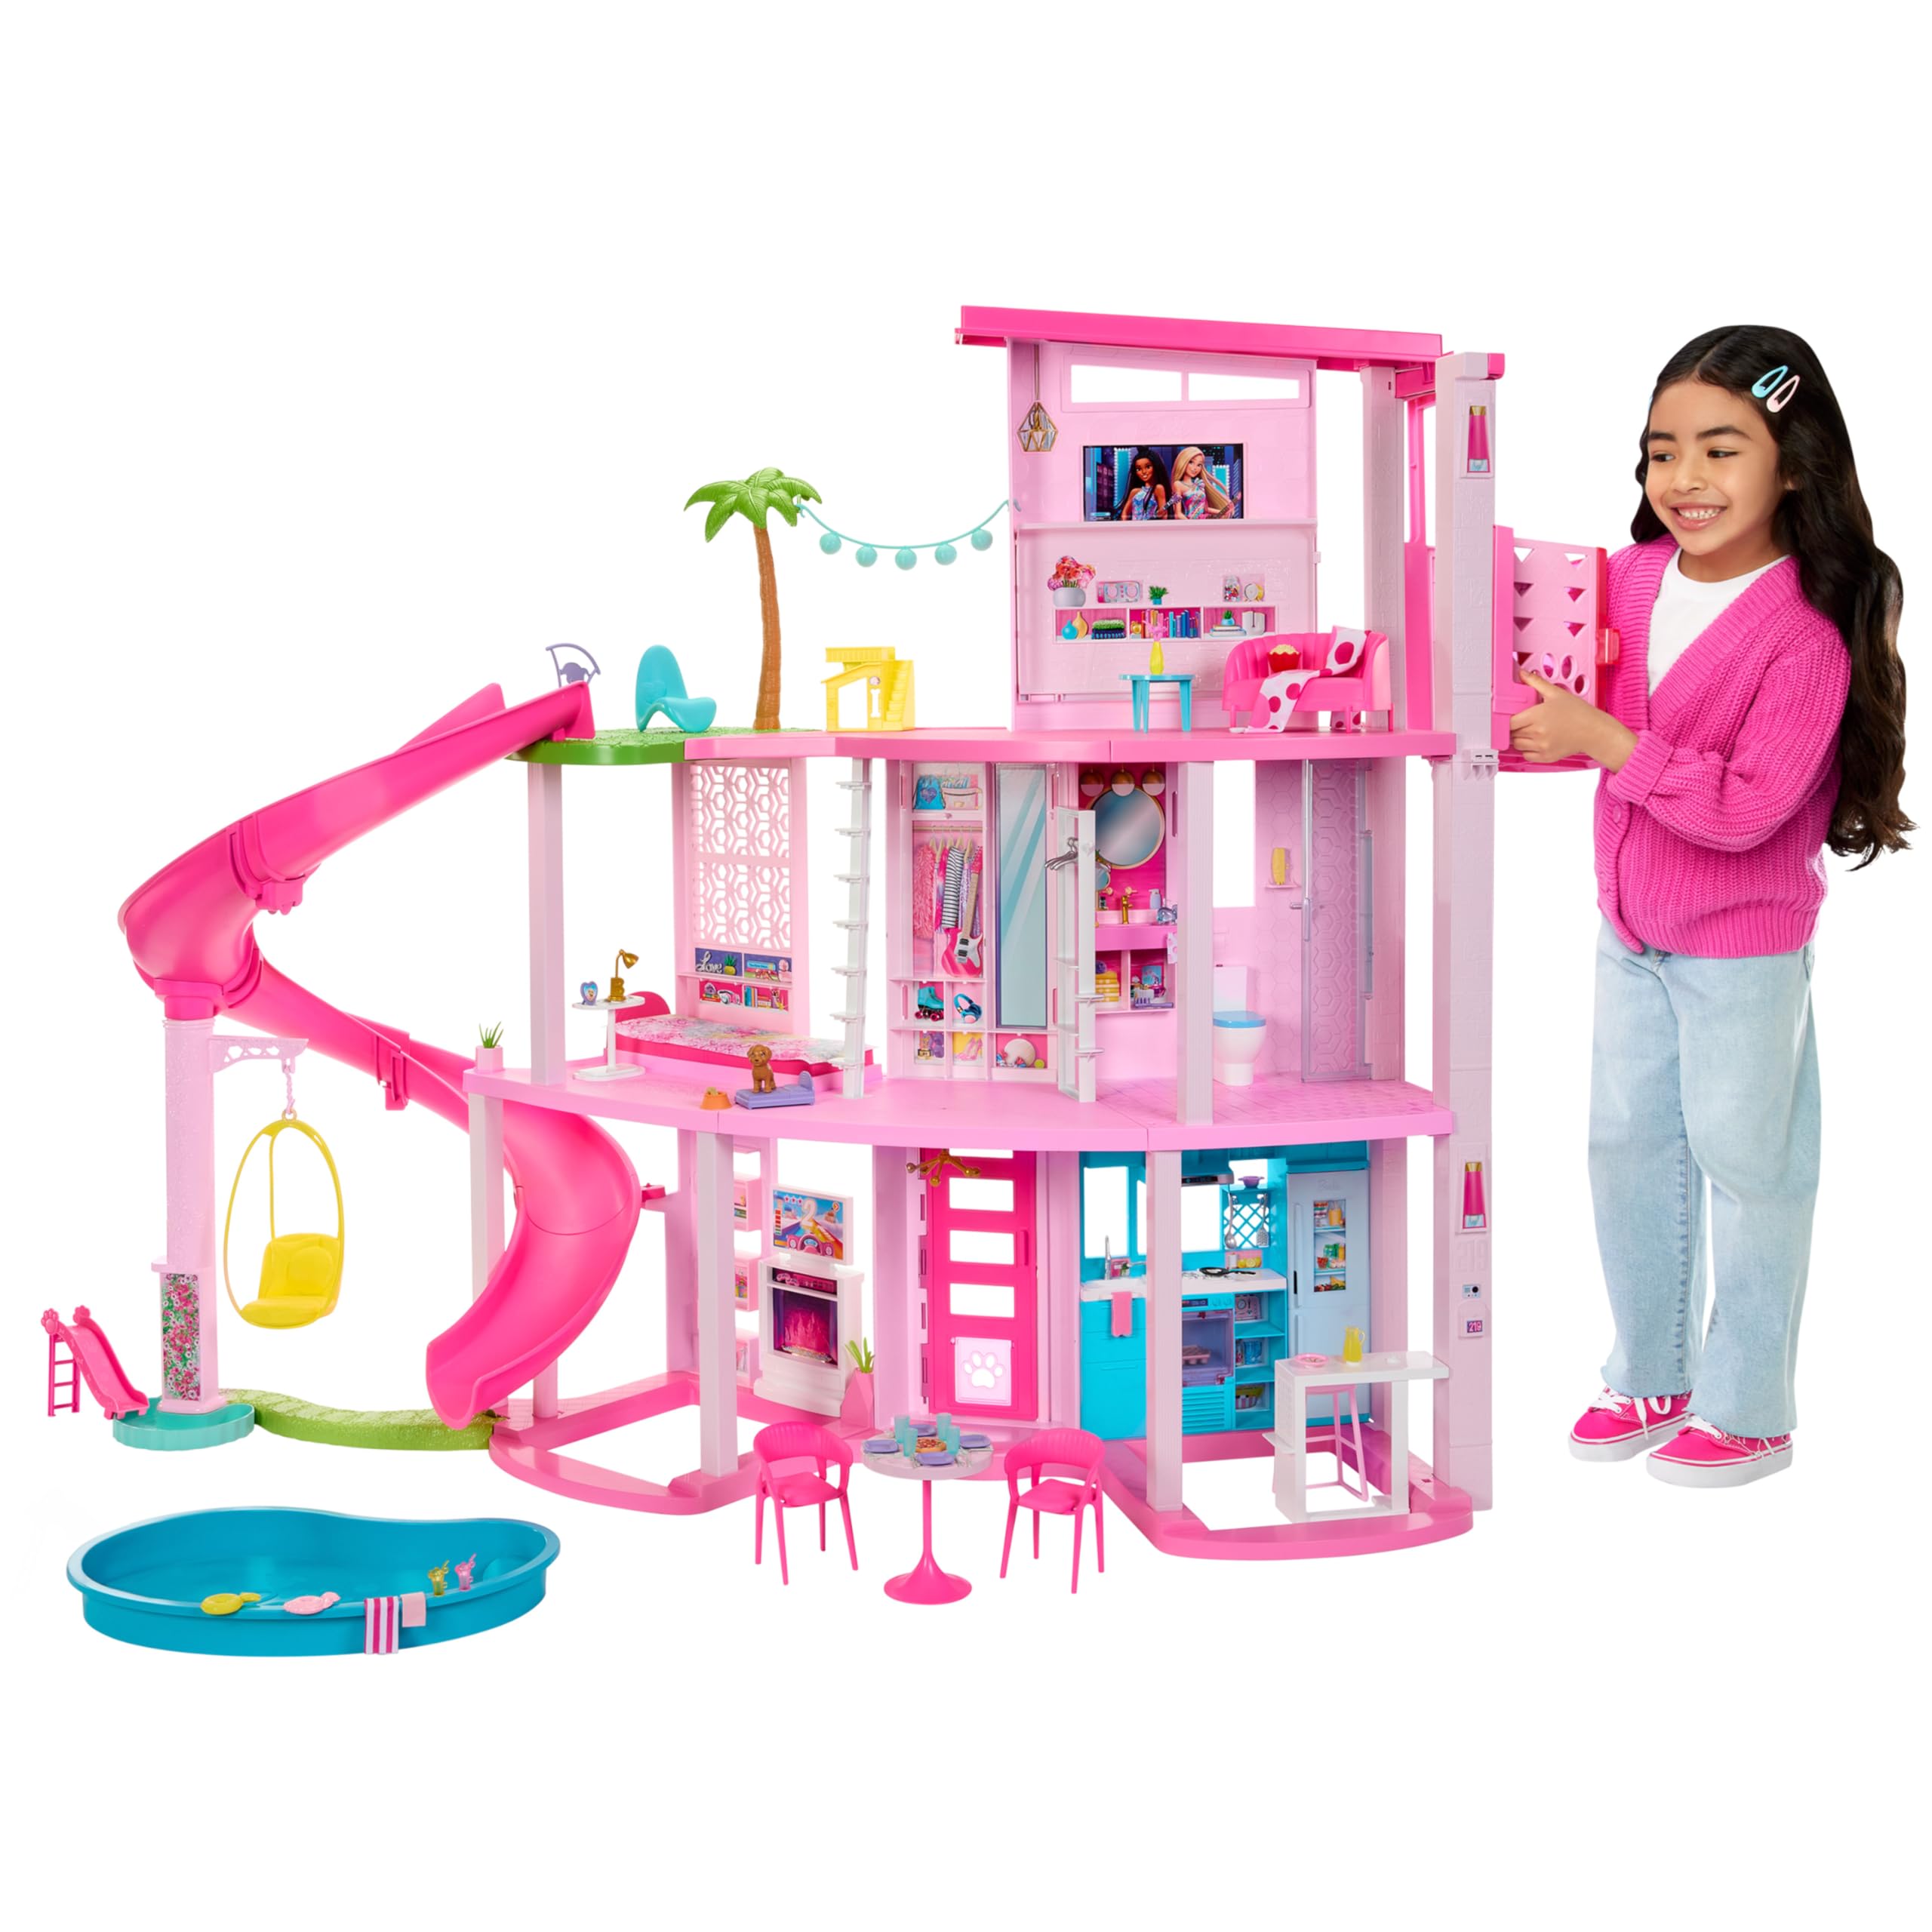 Barbie Dreamhouse 2023, Pool Party Doll House with 75+ Pieces and 3-Story Slide, Barbie House Playset, Pet Elevator and Puppy Play Areas?